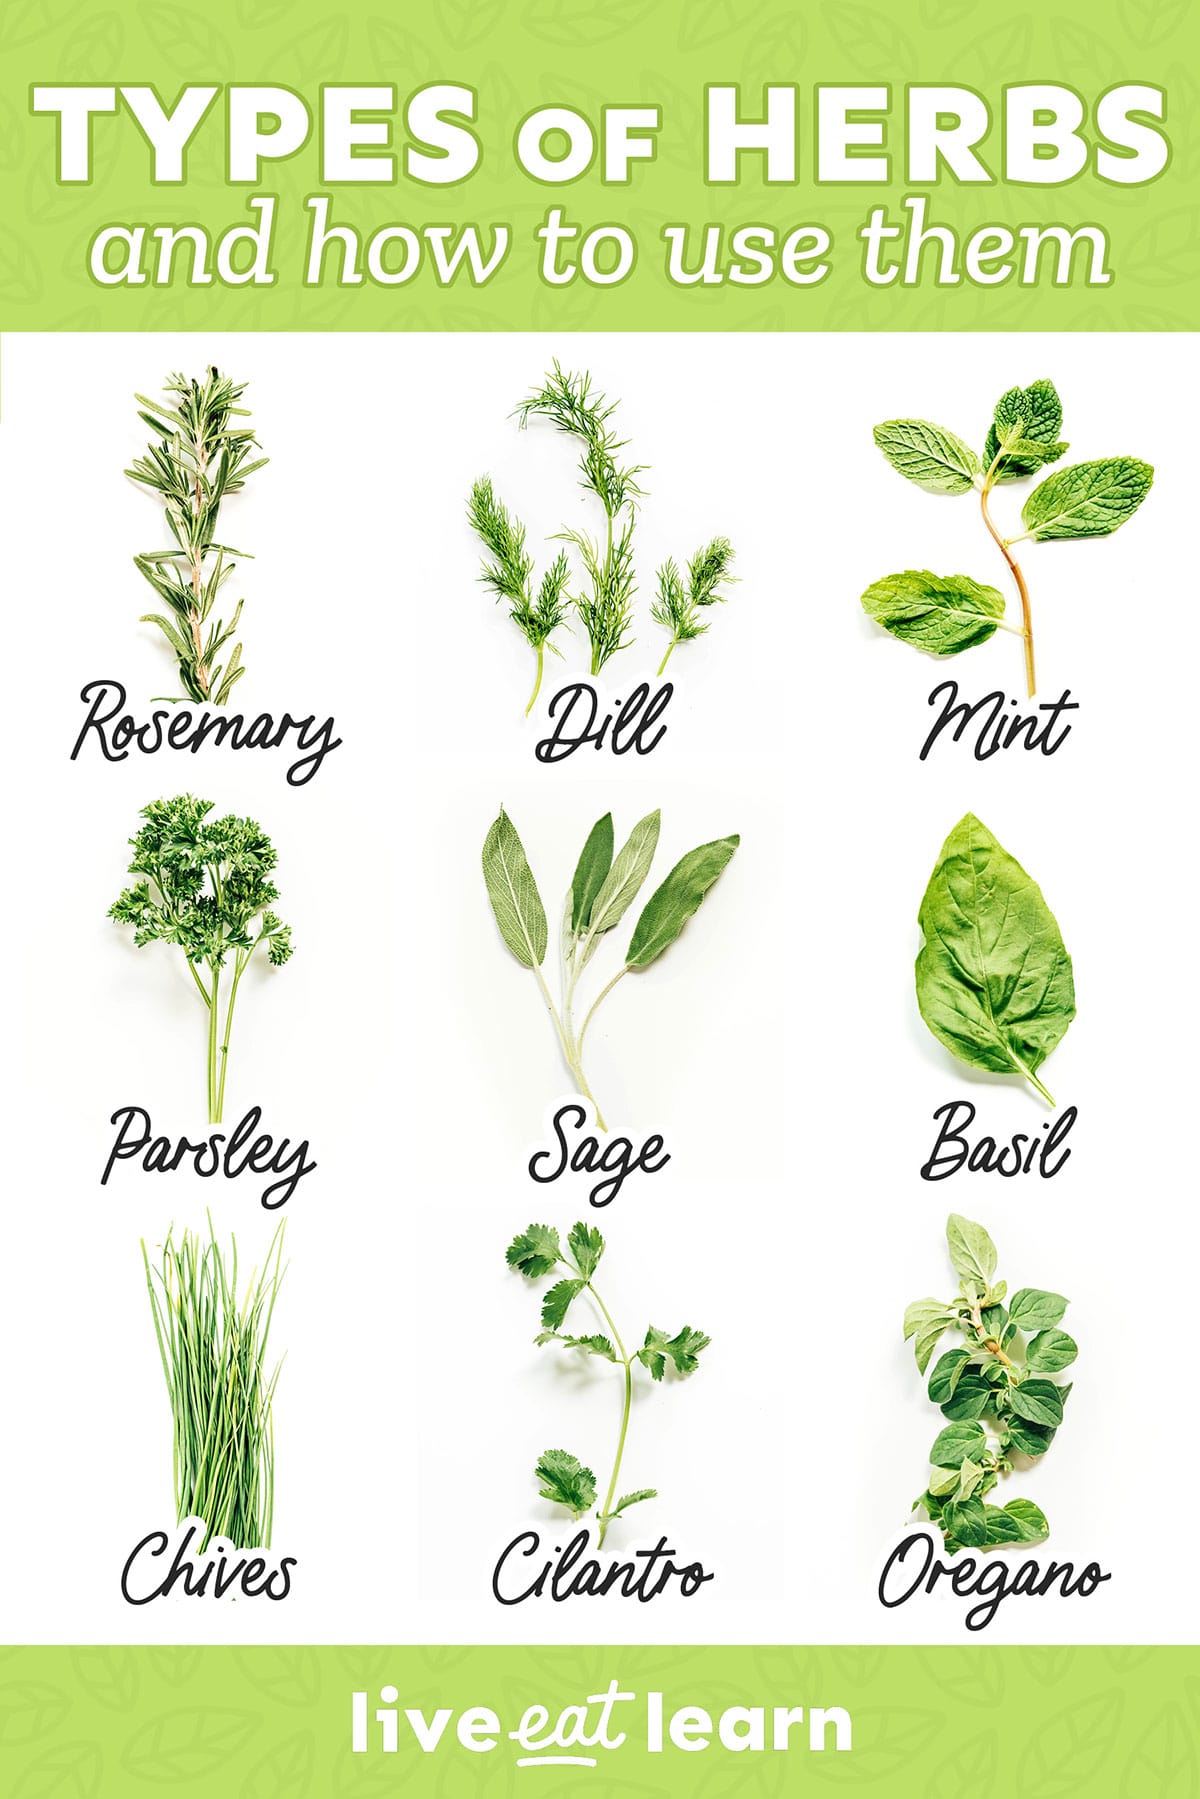 Different types of herbs labelled on a white background